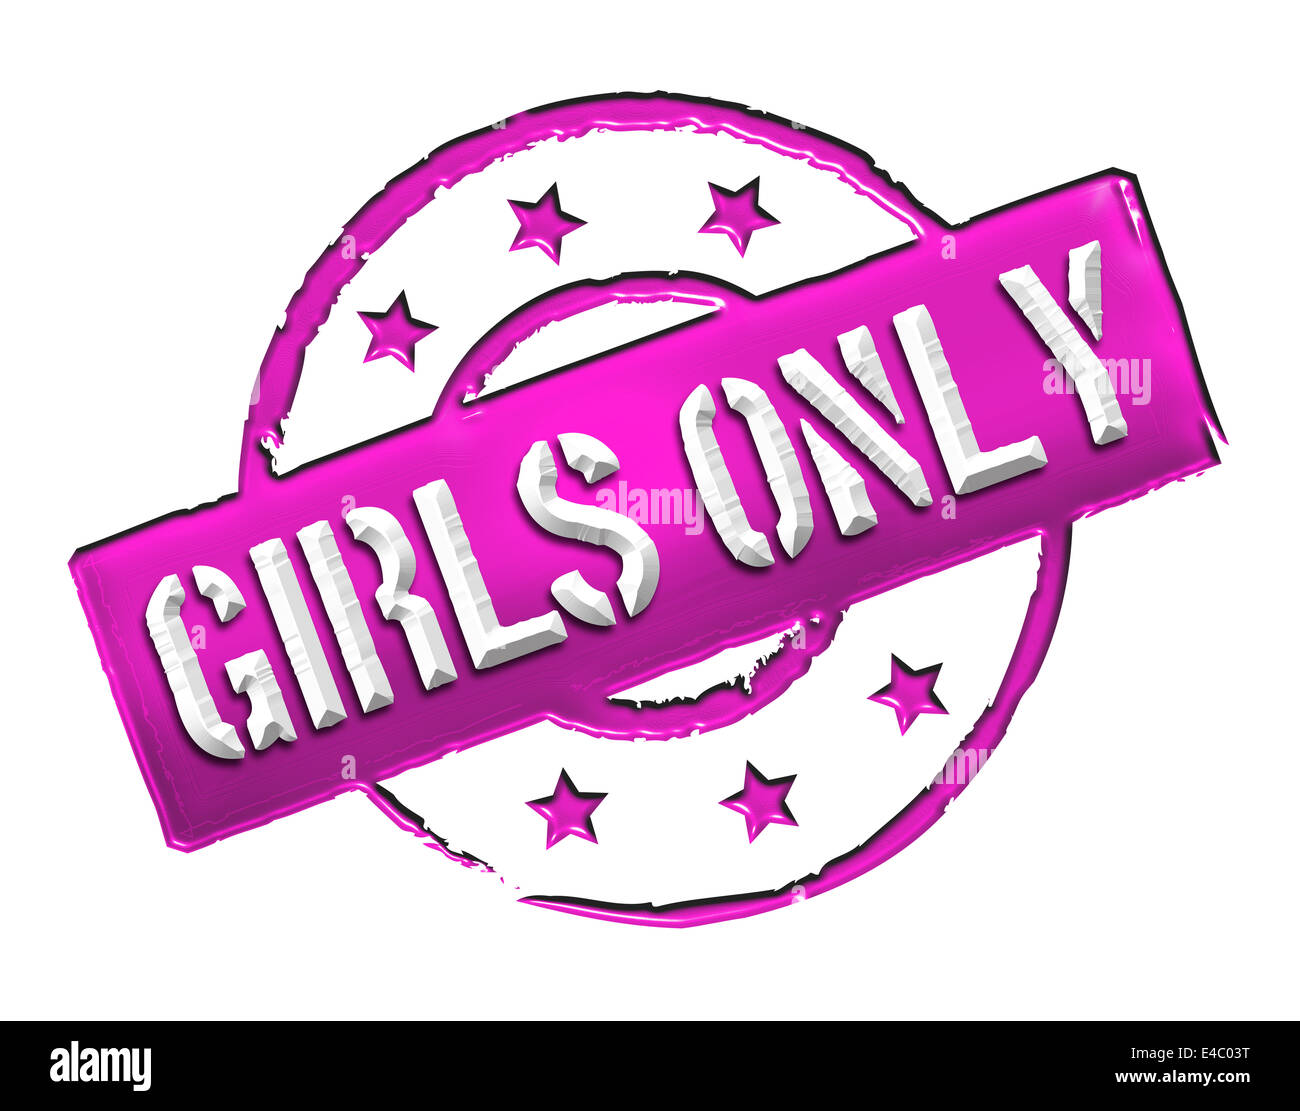 Stamp - Girls only Stock Photo - Alamy